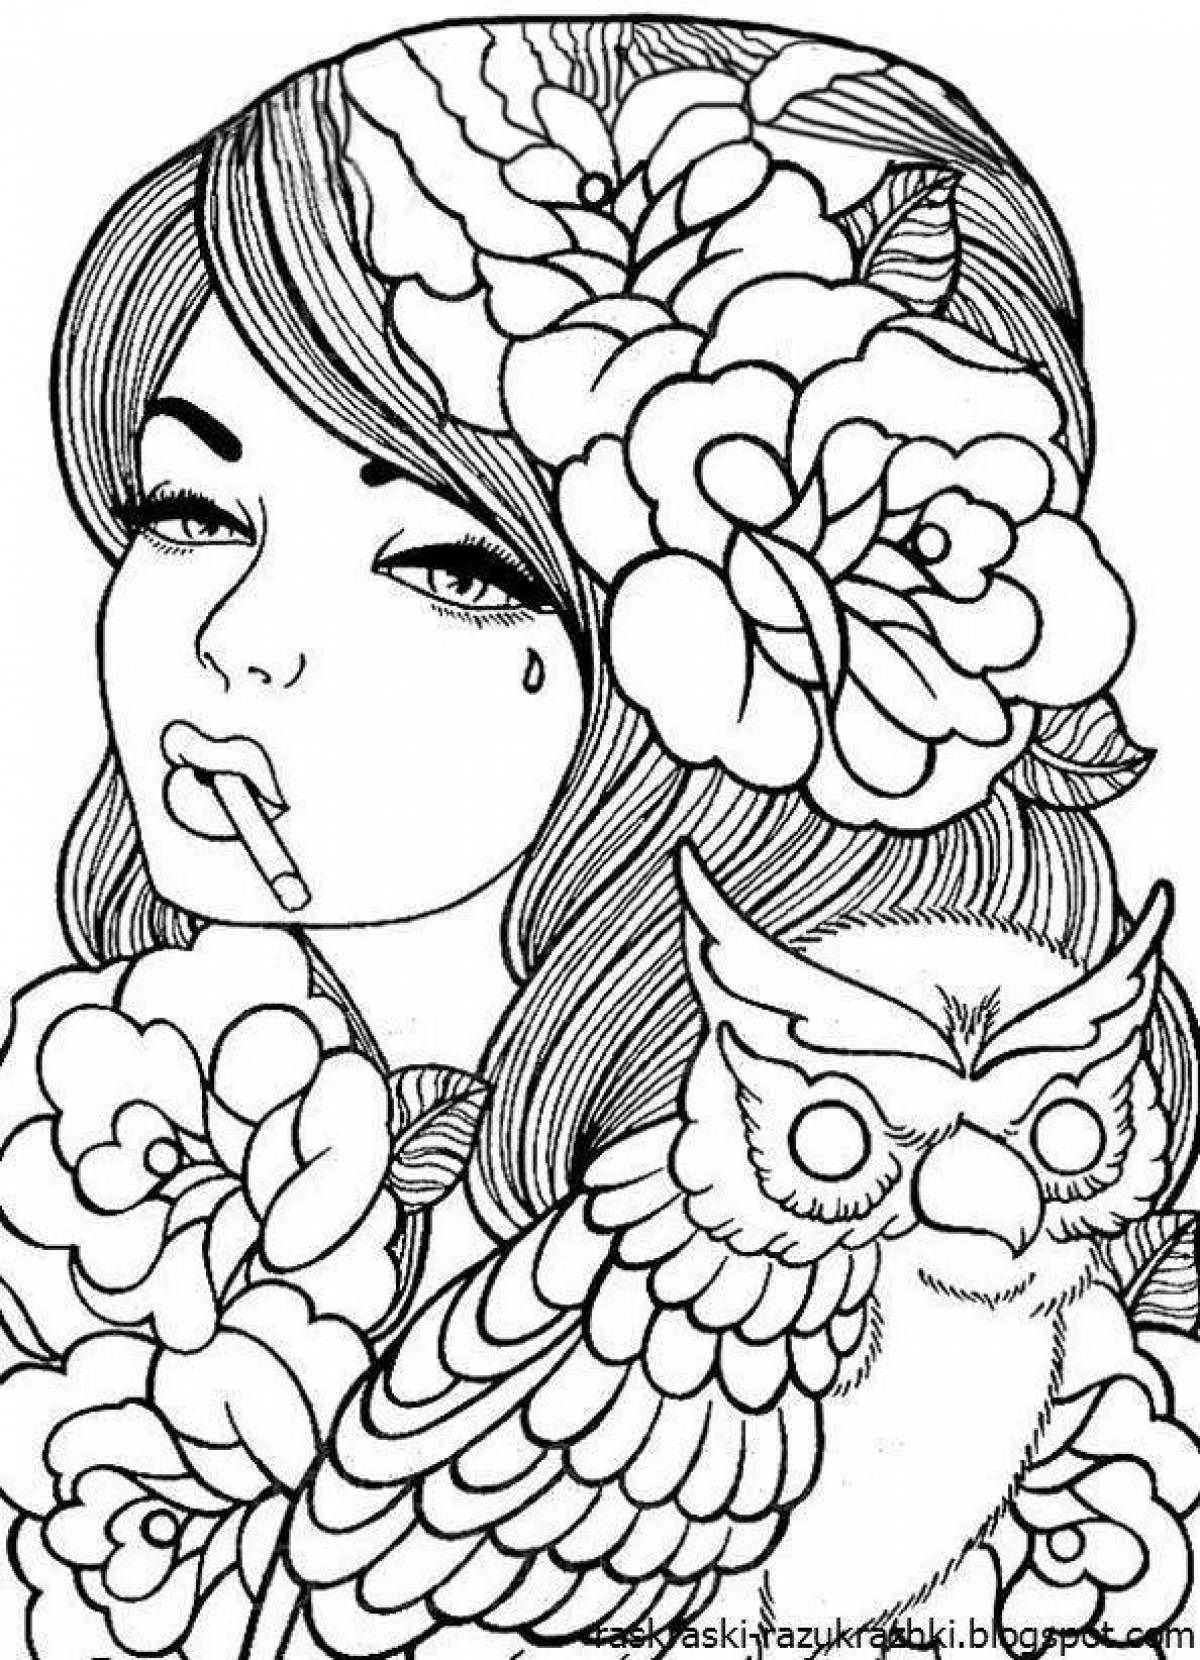 Colorful anti-stress coloring book for girls 13 years old